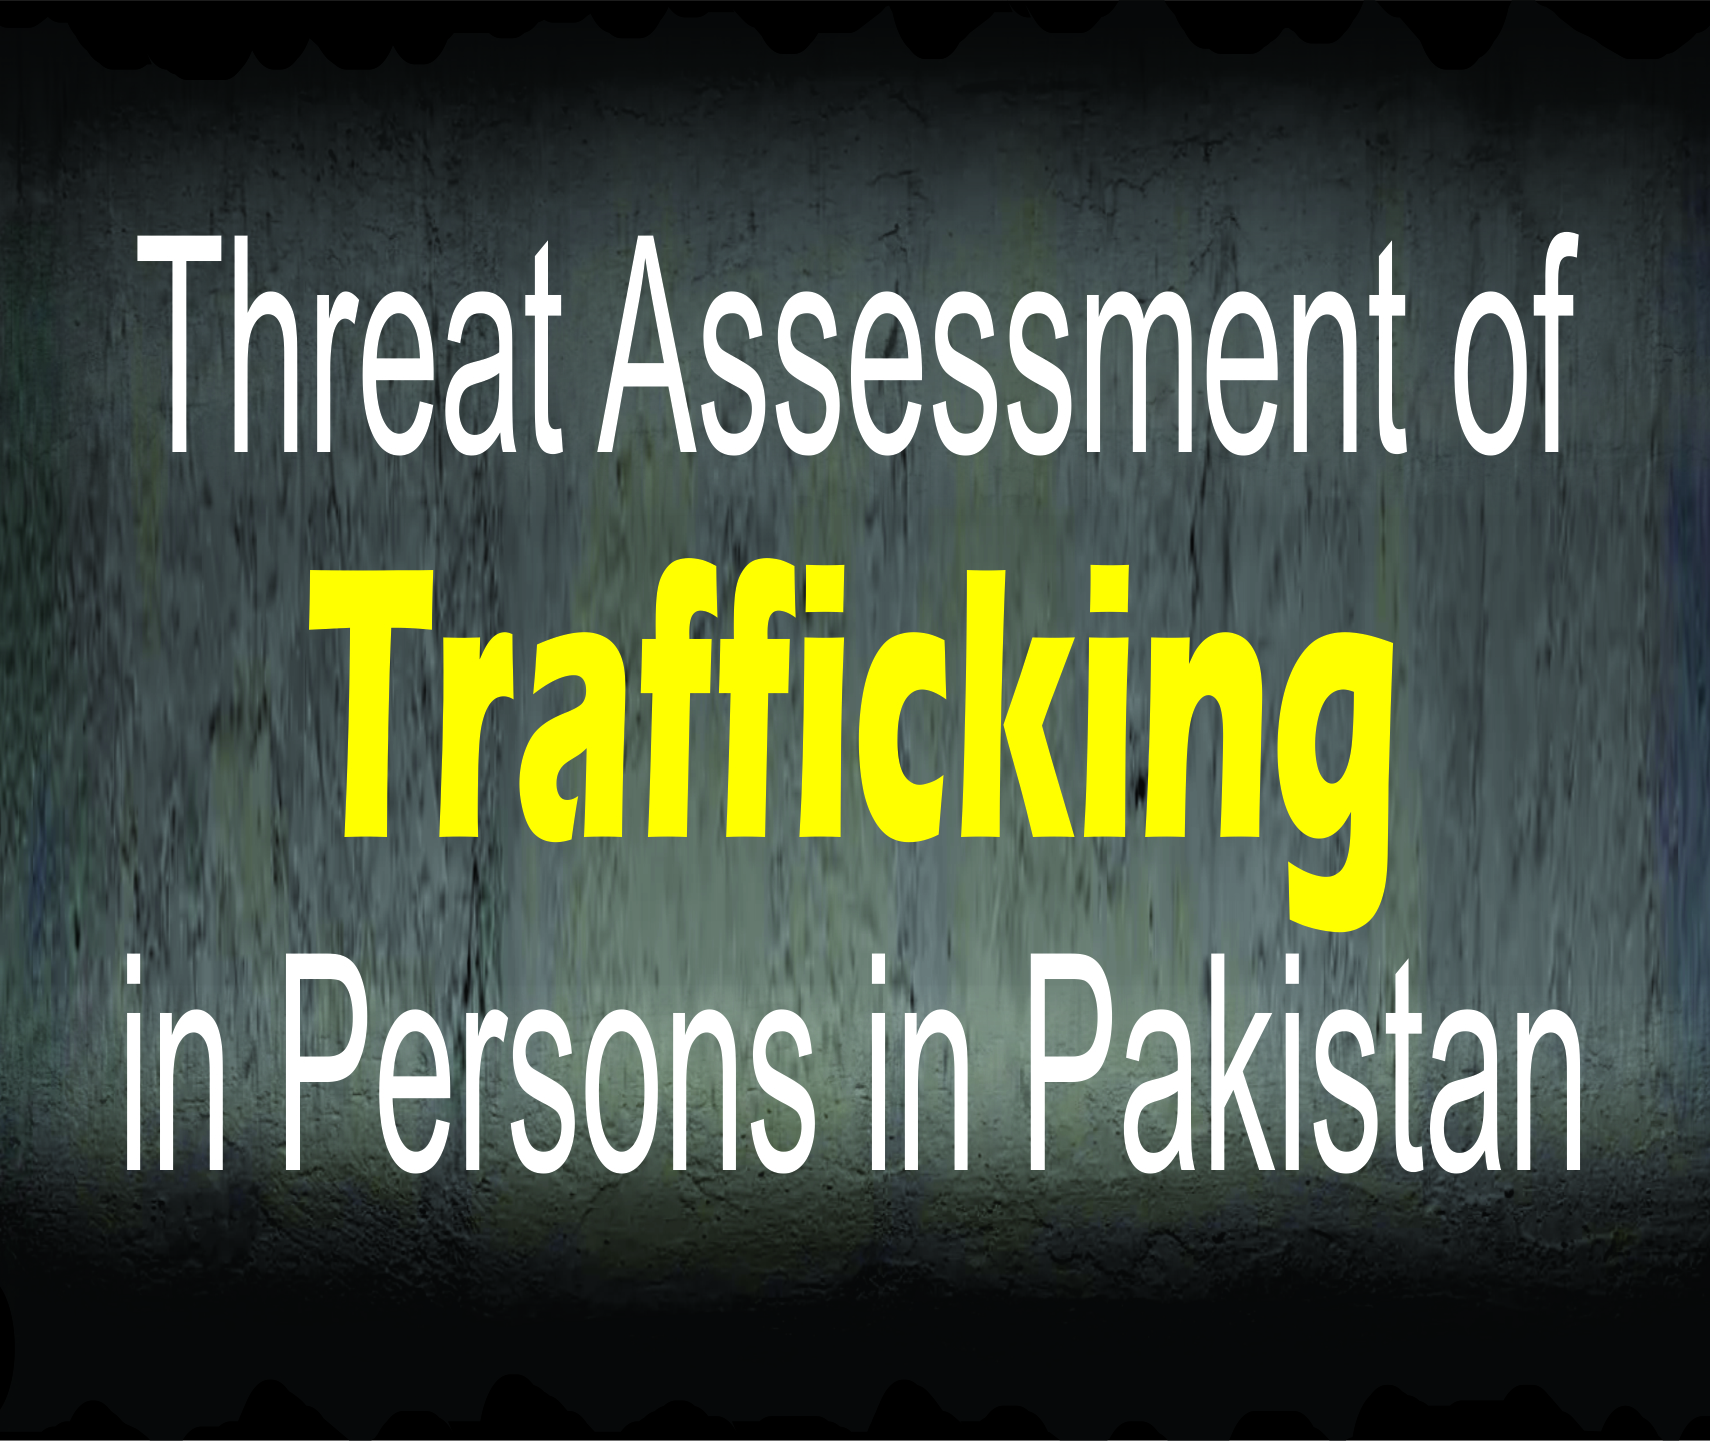 You are currently viewing Threat Assessment of Trafficking in Persons in Pakistan